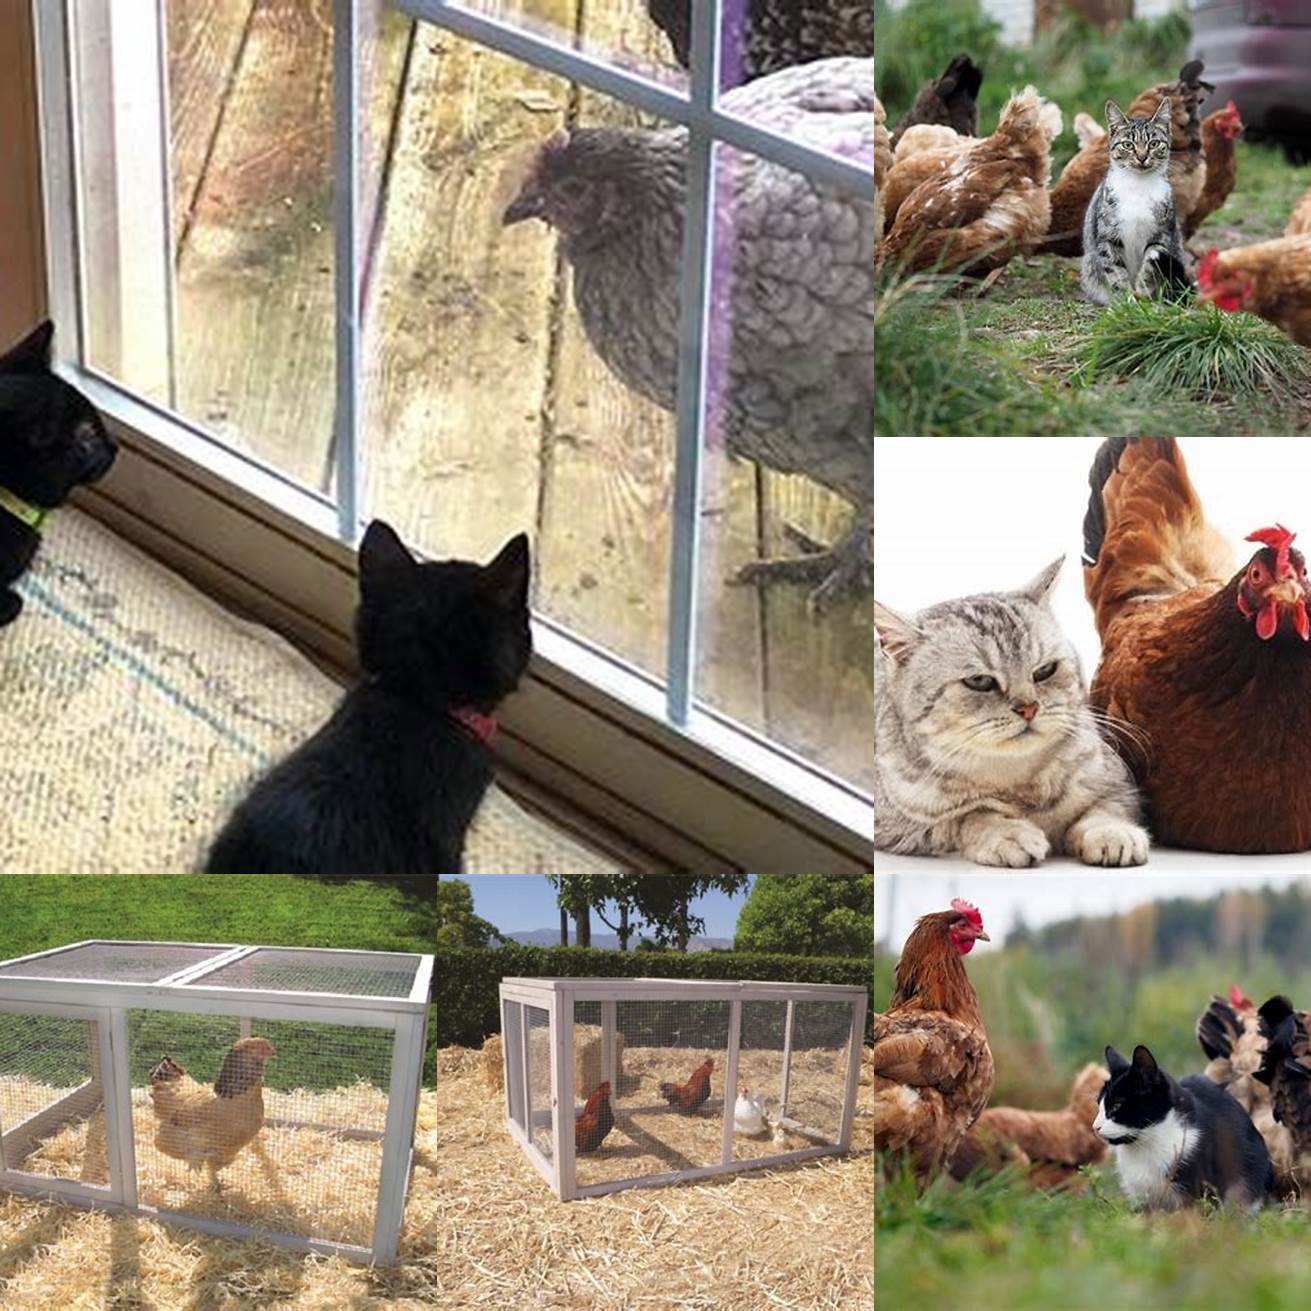 Provide a safe and secure environment for your chickens